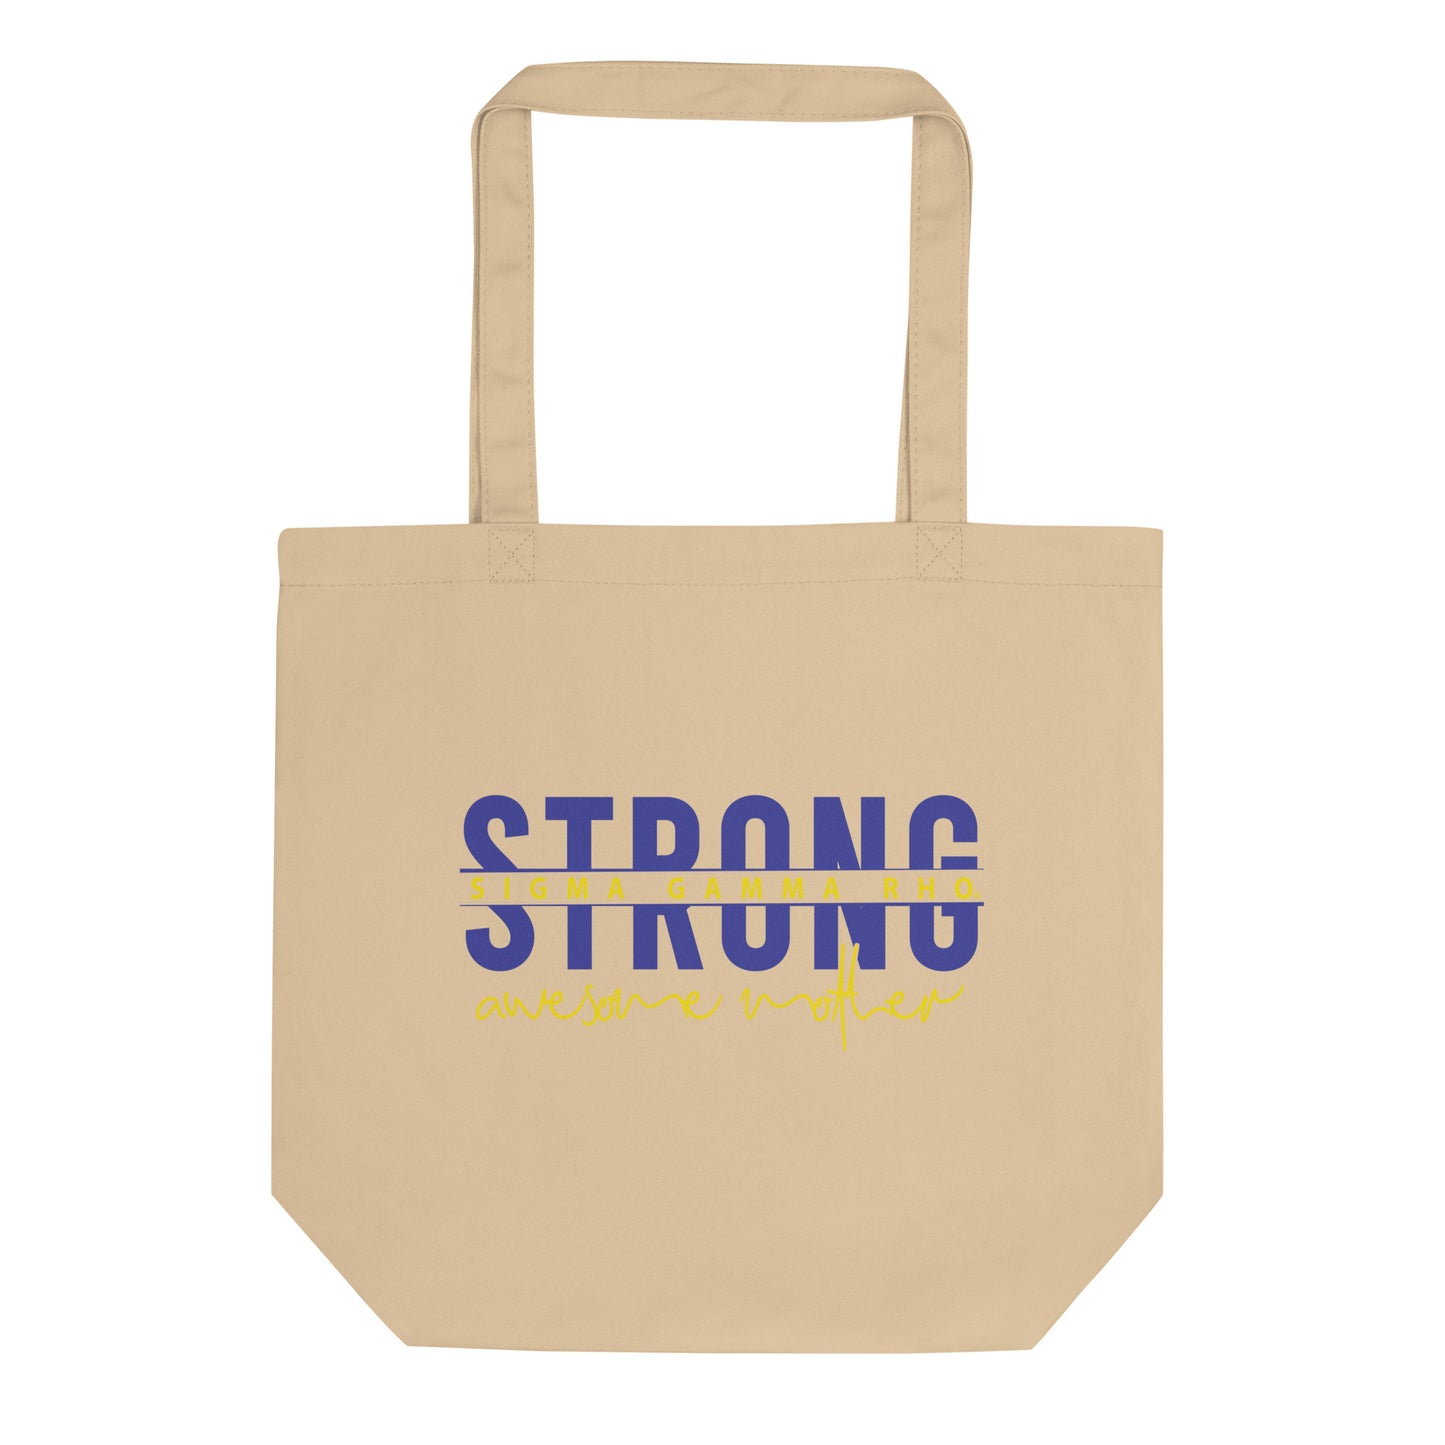 Sigma Gamma Rho Strong Awesome Mother Tote Bag